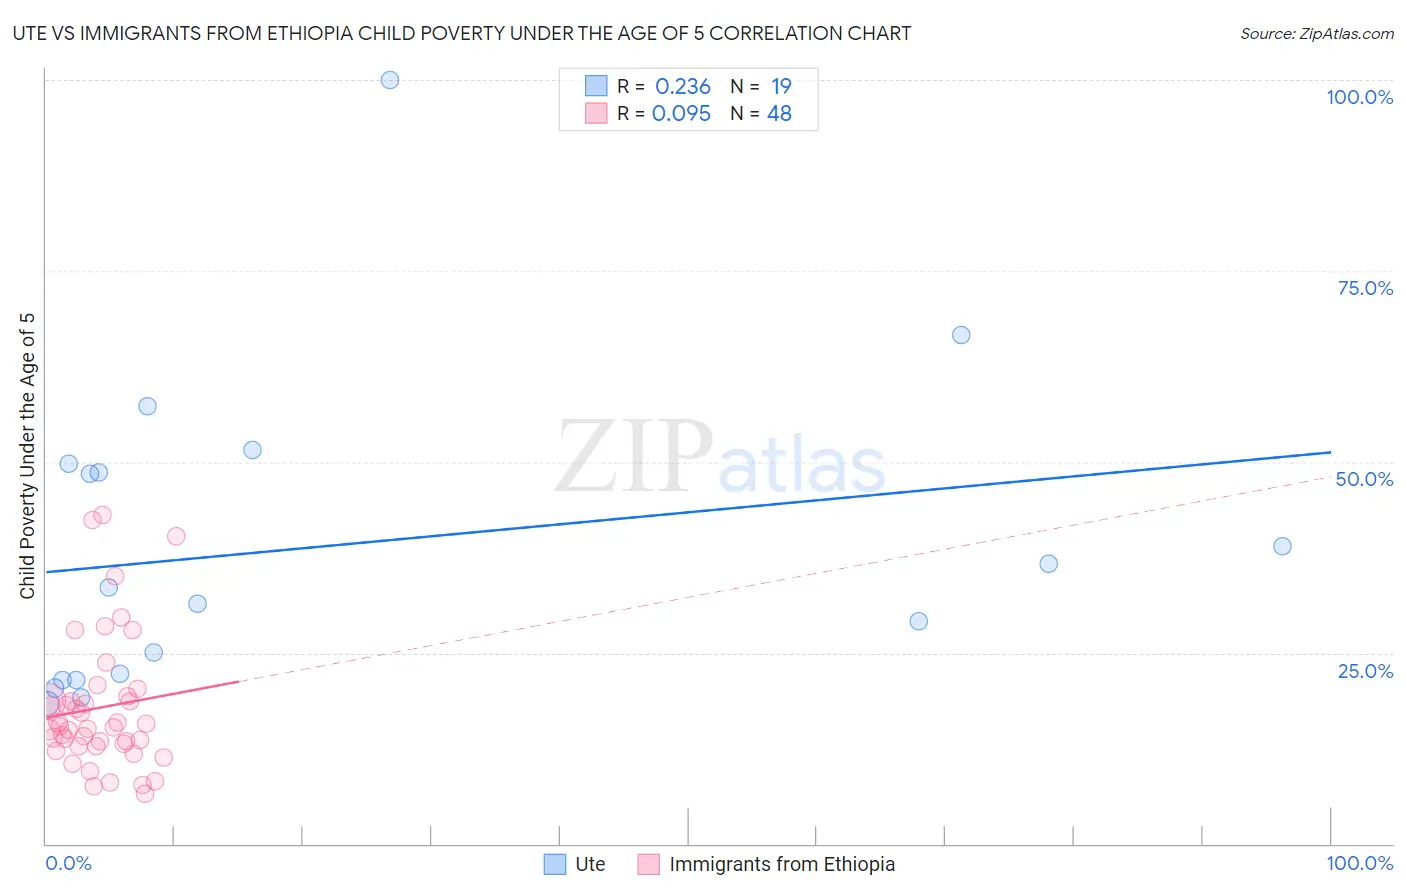 Ute vs Immigrants from Ethiopia Child Poverty Under the Age of 5